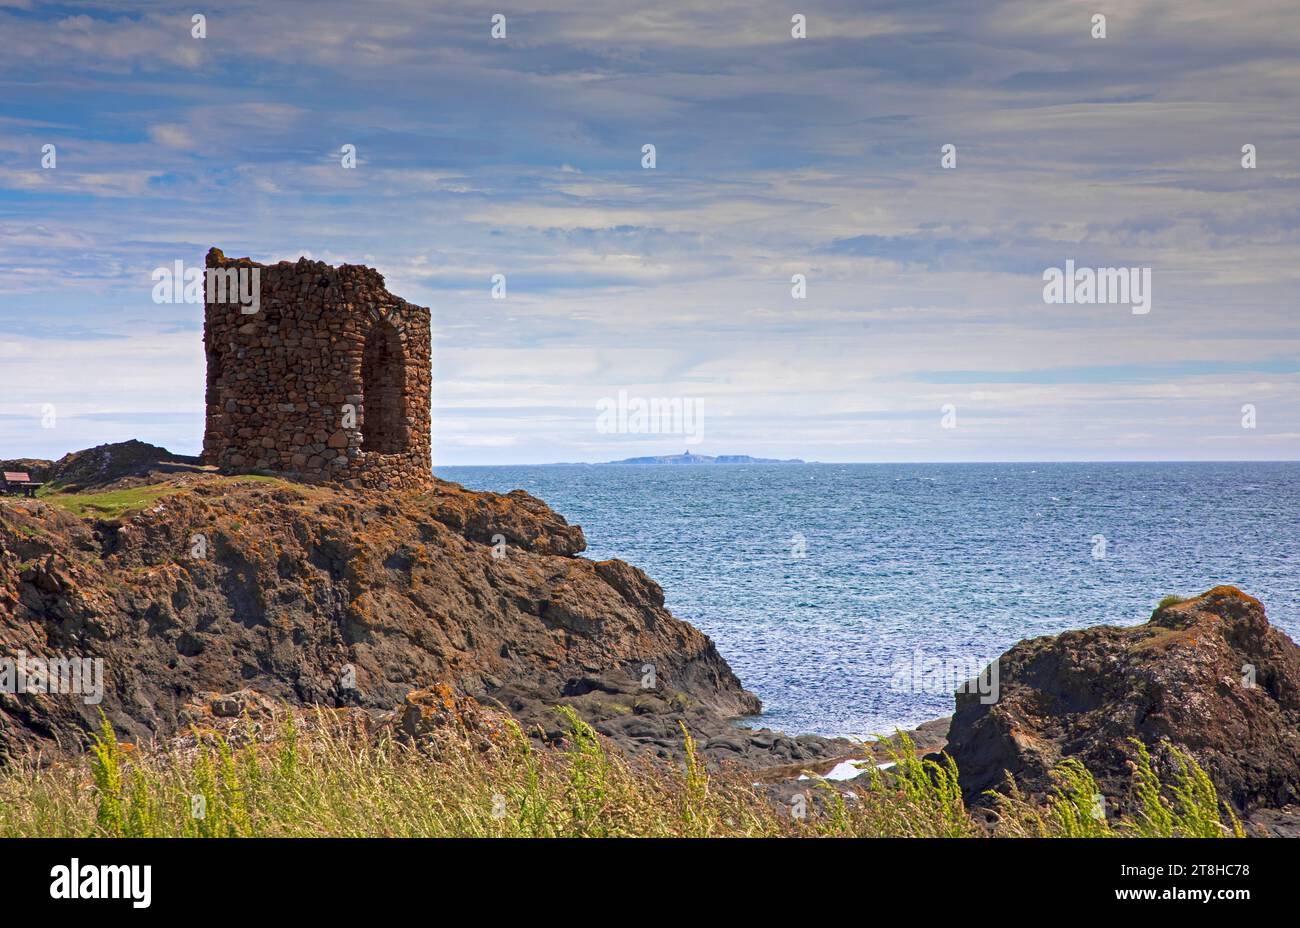 Lady's Tower on Fife Coastal Path with Isle of May in background over the Firth of Forth, Elie, Fife, Scotland, UK. Stock Photo